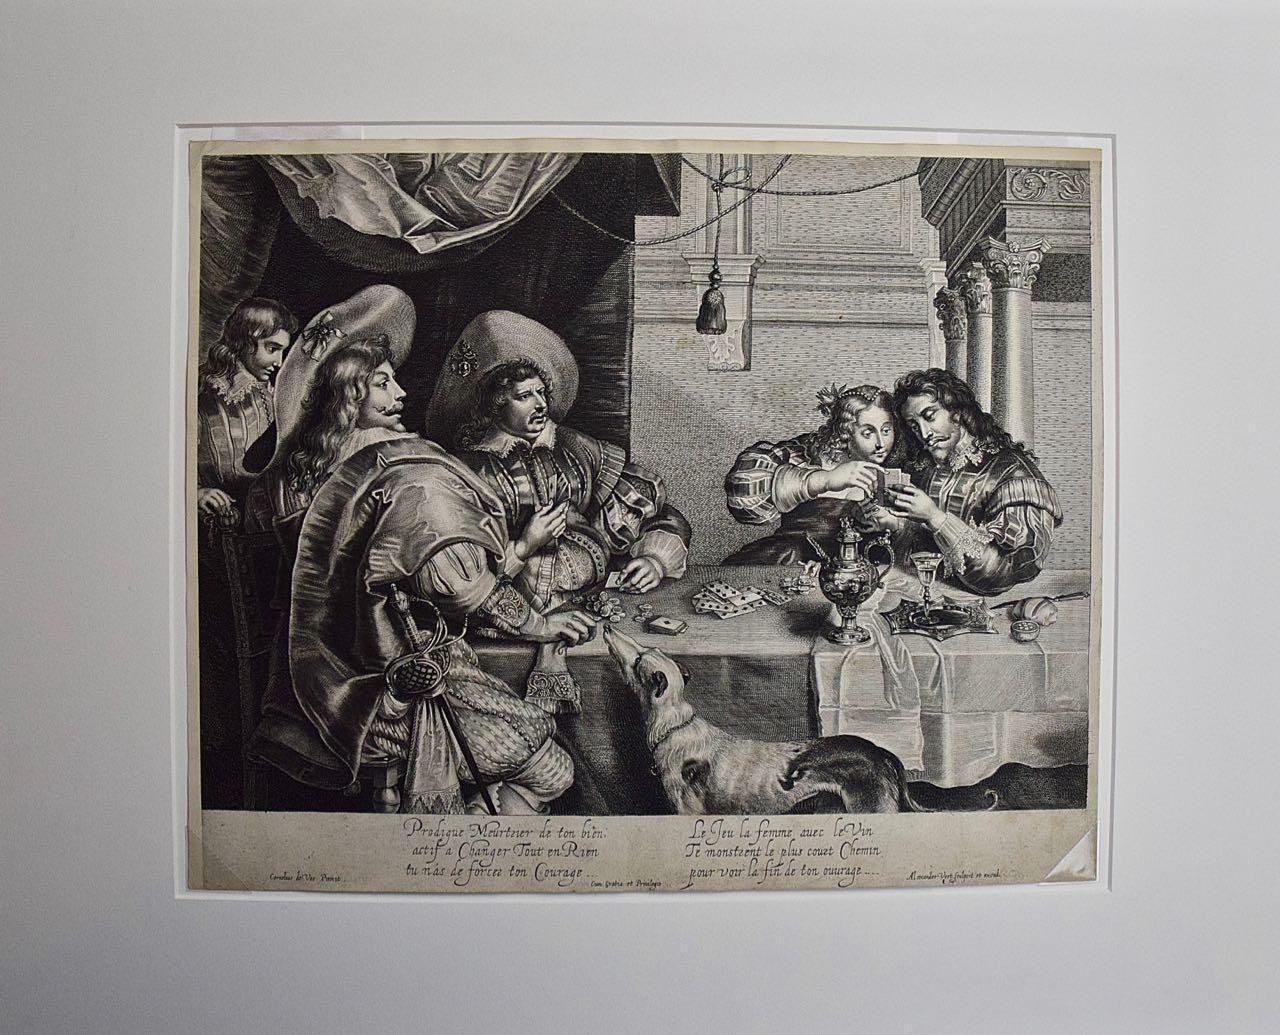  The Card Game: An Early 17th Century Engraving by A. Voet after Cornelis de Vos - Print by Alexander Voet